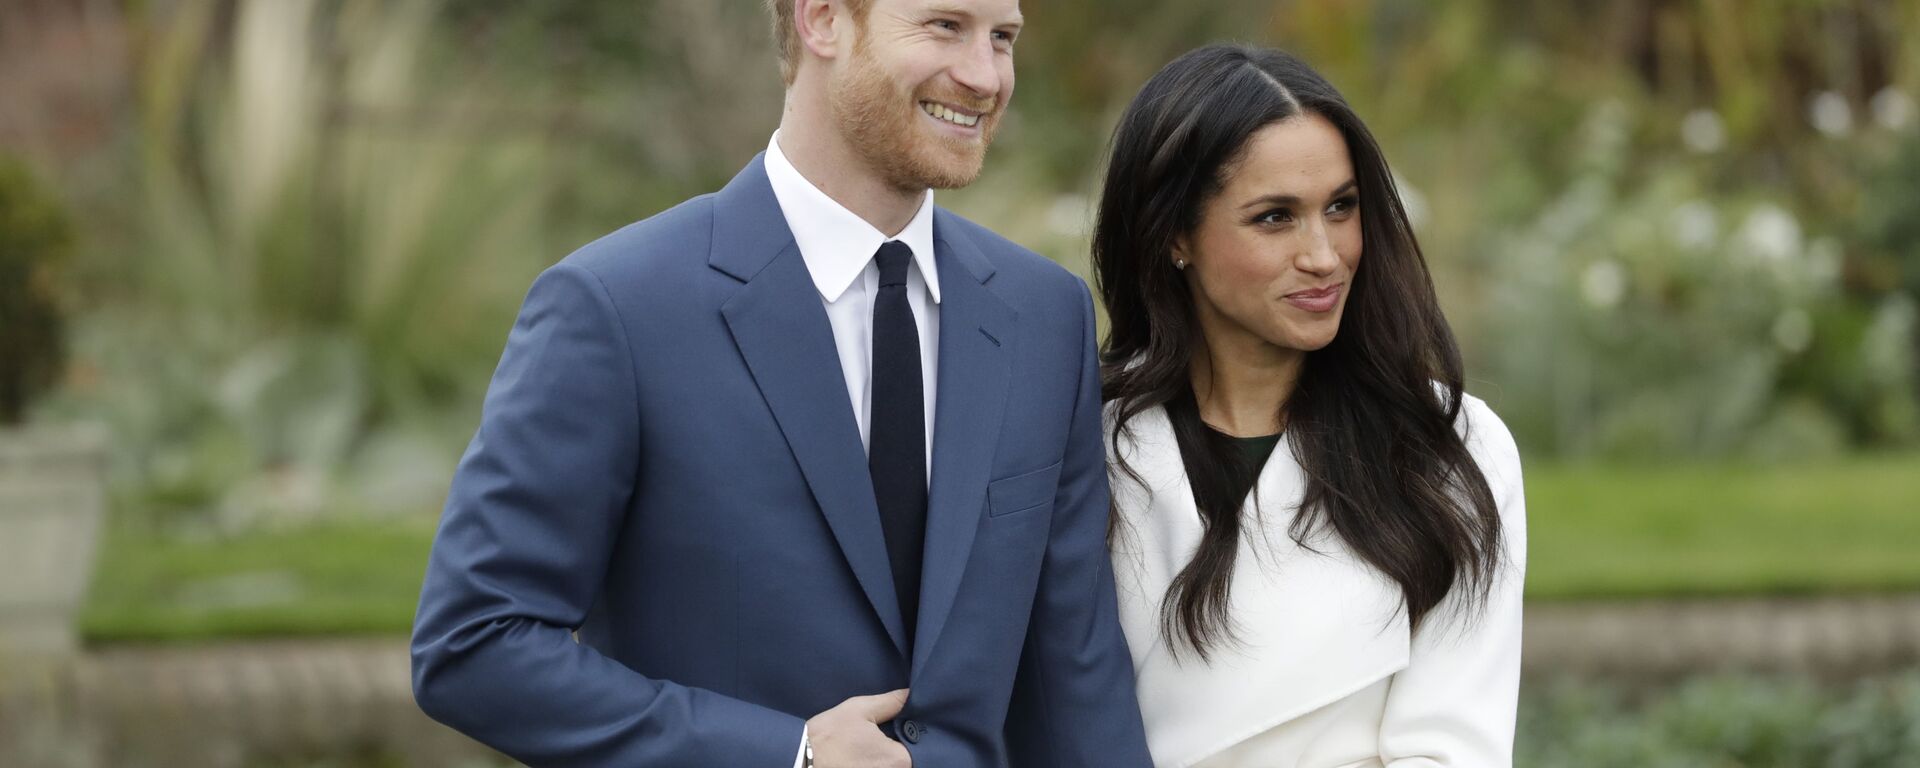 Britain's Prince Harry and his fiancee Meghan Markle pose for photographers during a photocall in the grounds of Kensington Palace in London, Monday Nov. 27, 2017 - Sputnik International, 1920, 07.02.2022